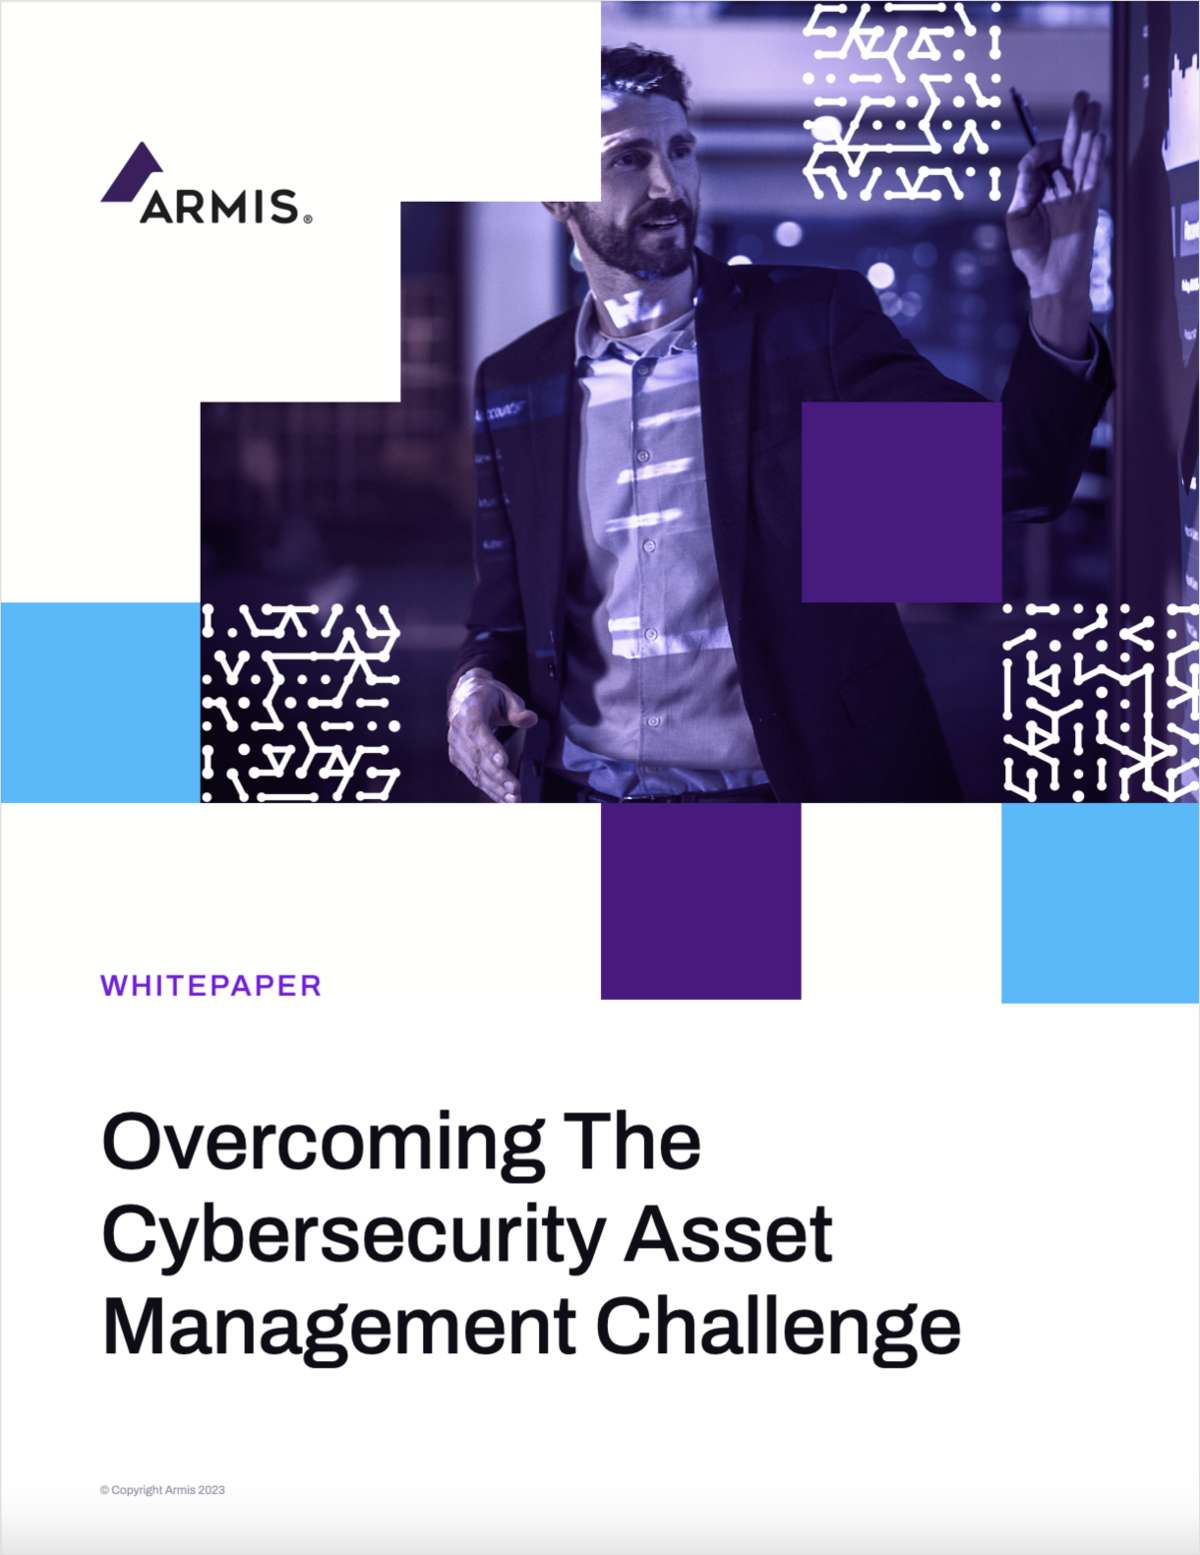 White paper Overcoming The Cybersecurity Asset Management Challenge